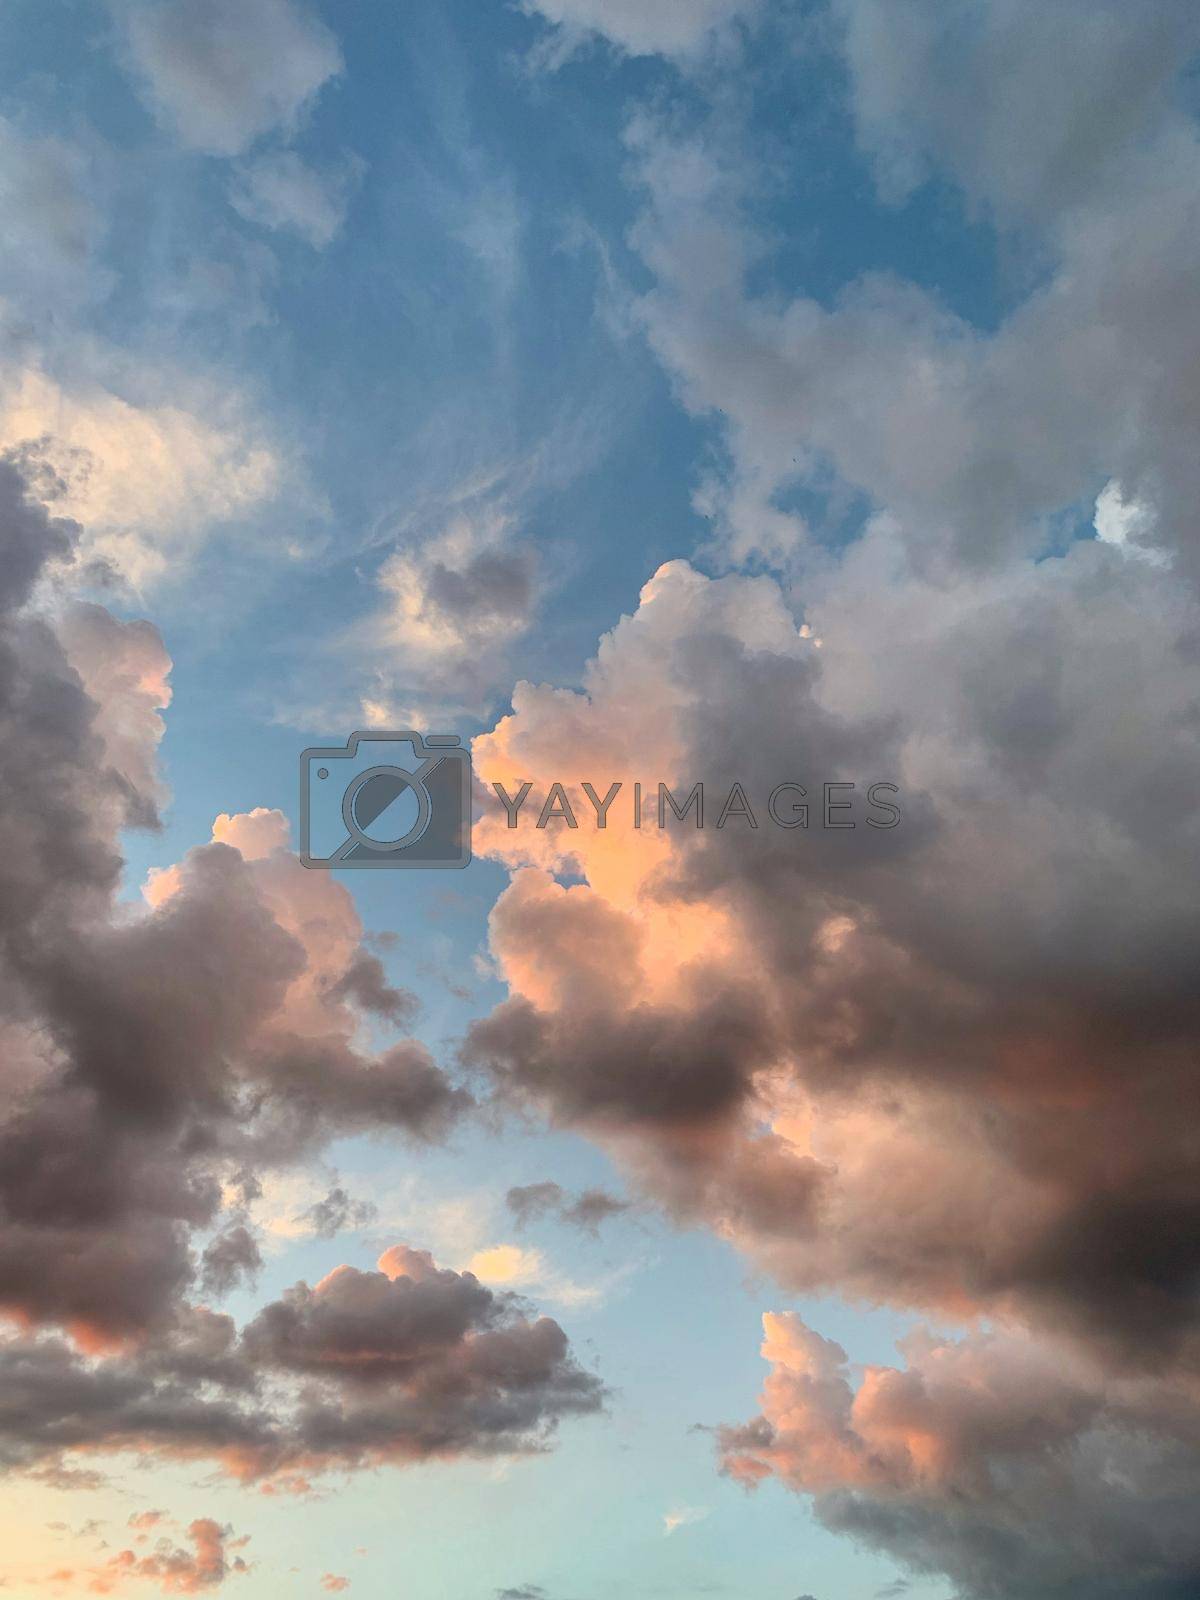 Royalty free image of Sky and cloud for background sunset or sunrise by Olena_Mykhailenko